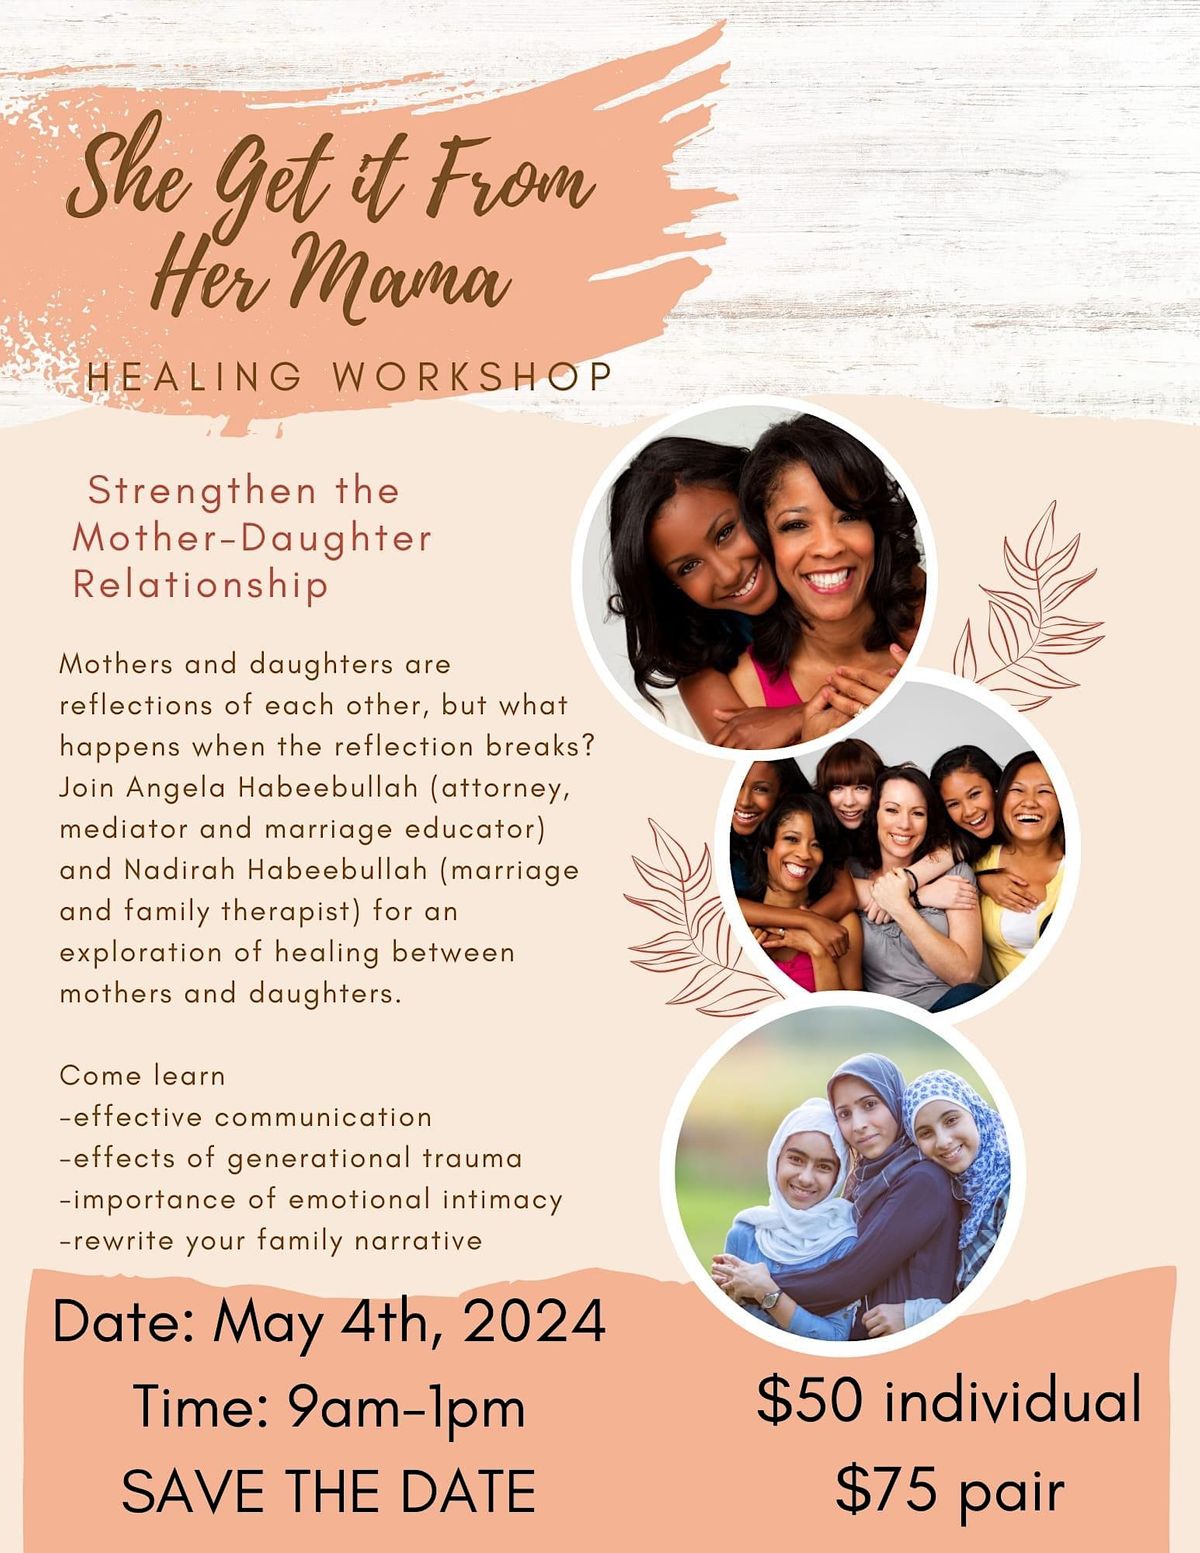 She Get It From Her Mama: Mother-Daughter Healing Workshop